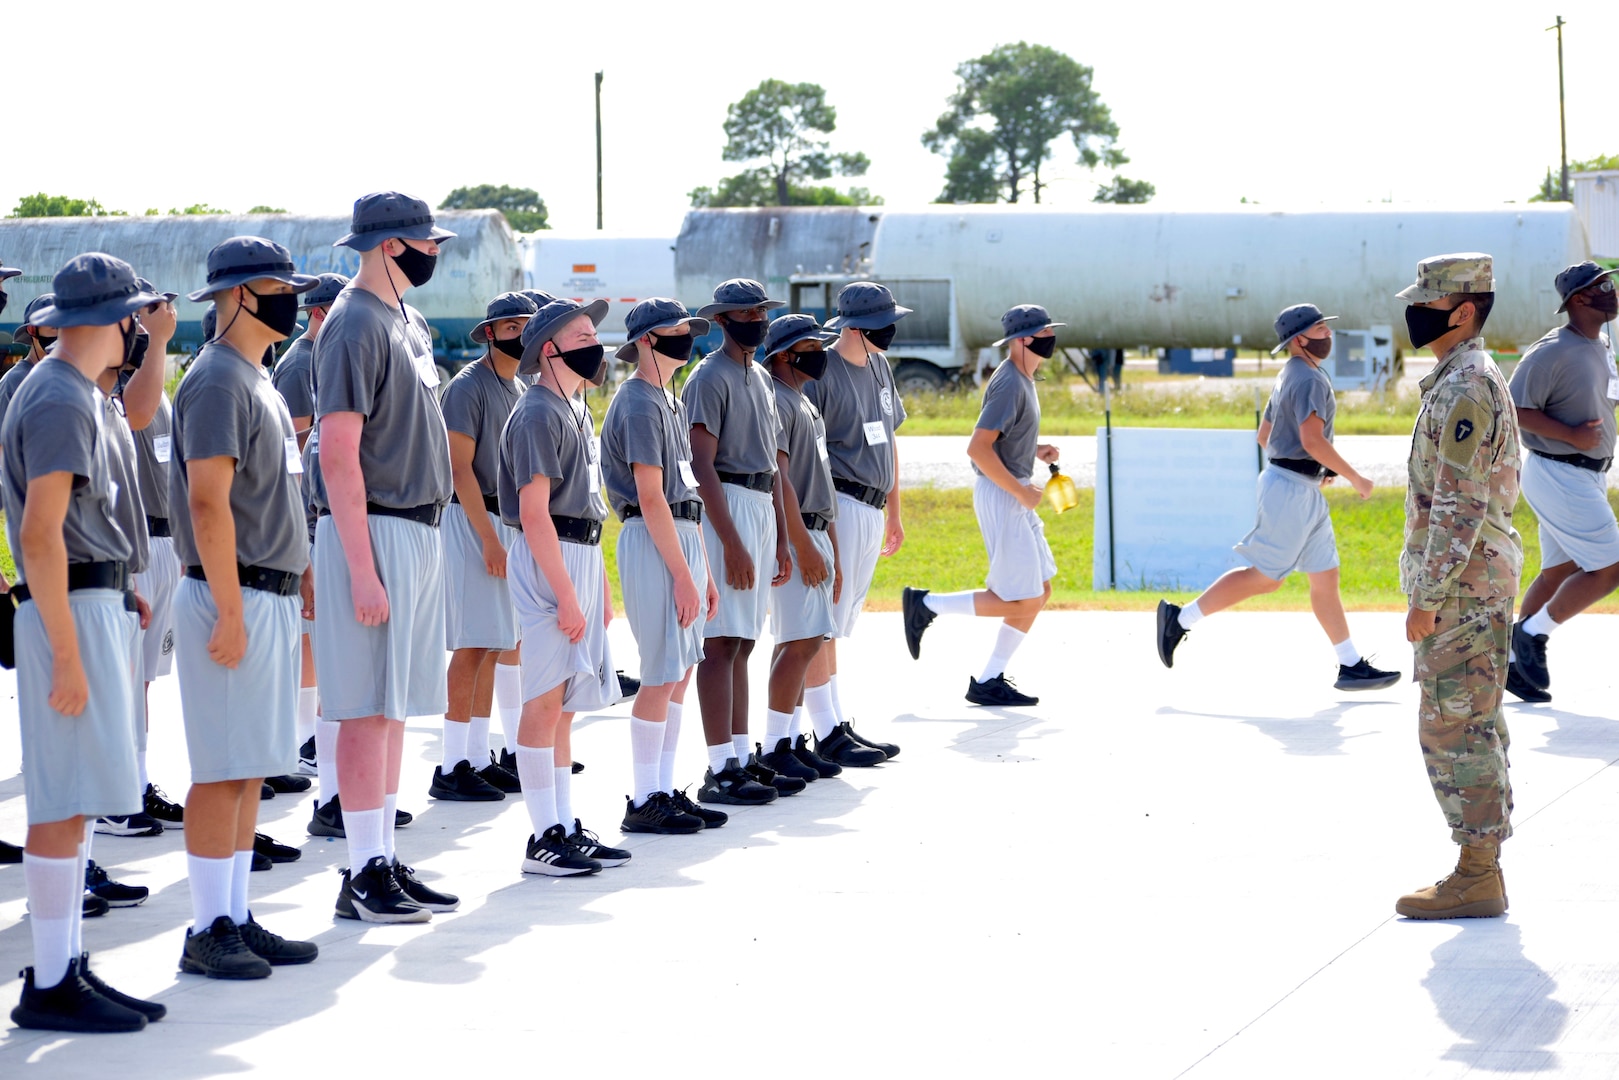 Pfc. Luis Lopez of the Texas National Guard Joint Counterdrug Task Force instructs cadets on drill and ceremony at the Texas ChalleNGe Academy in Eagle Lake, Texas. Service members, staff and students took precautions and measures to prevent the spread of COVID-19 while giving at-risk young people opportunities not afforded to them previously.